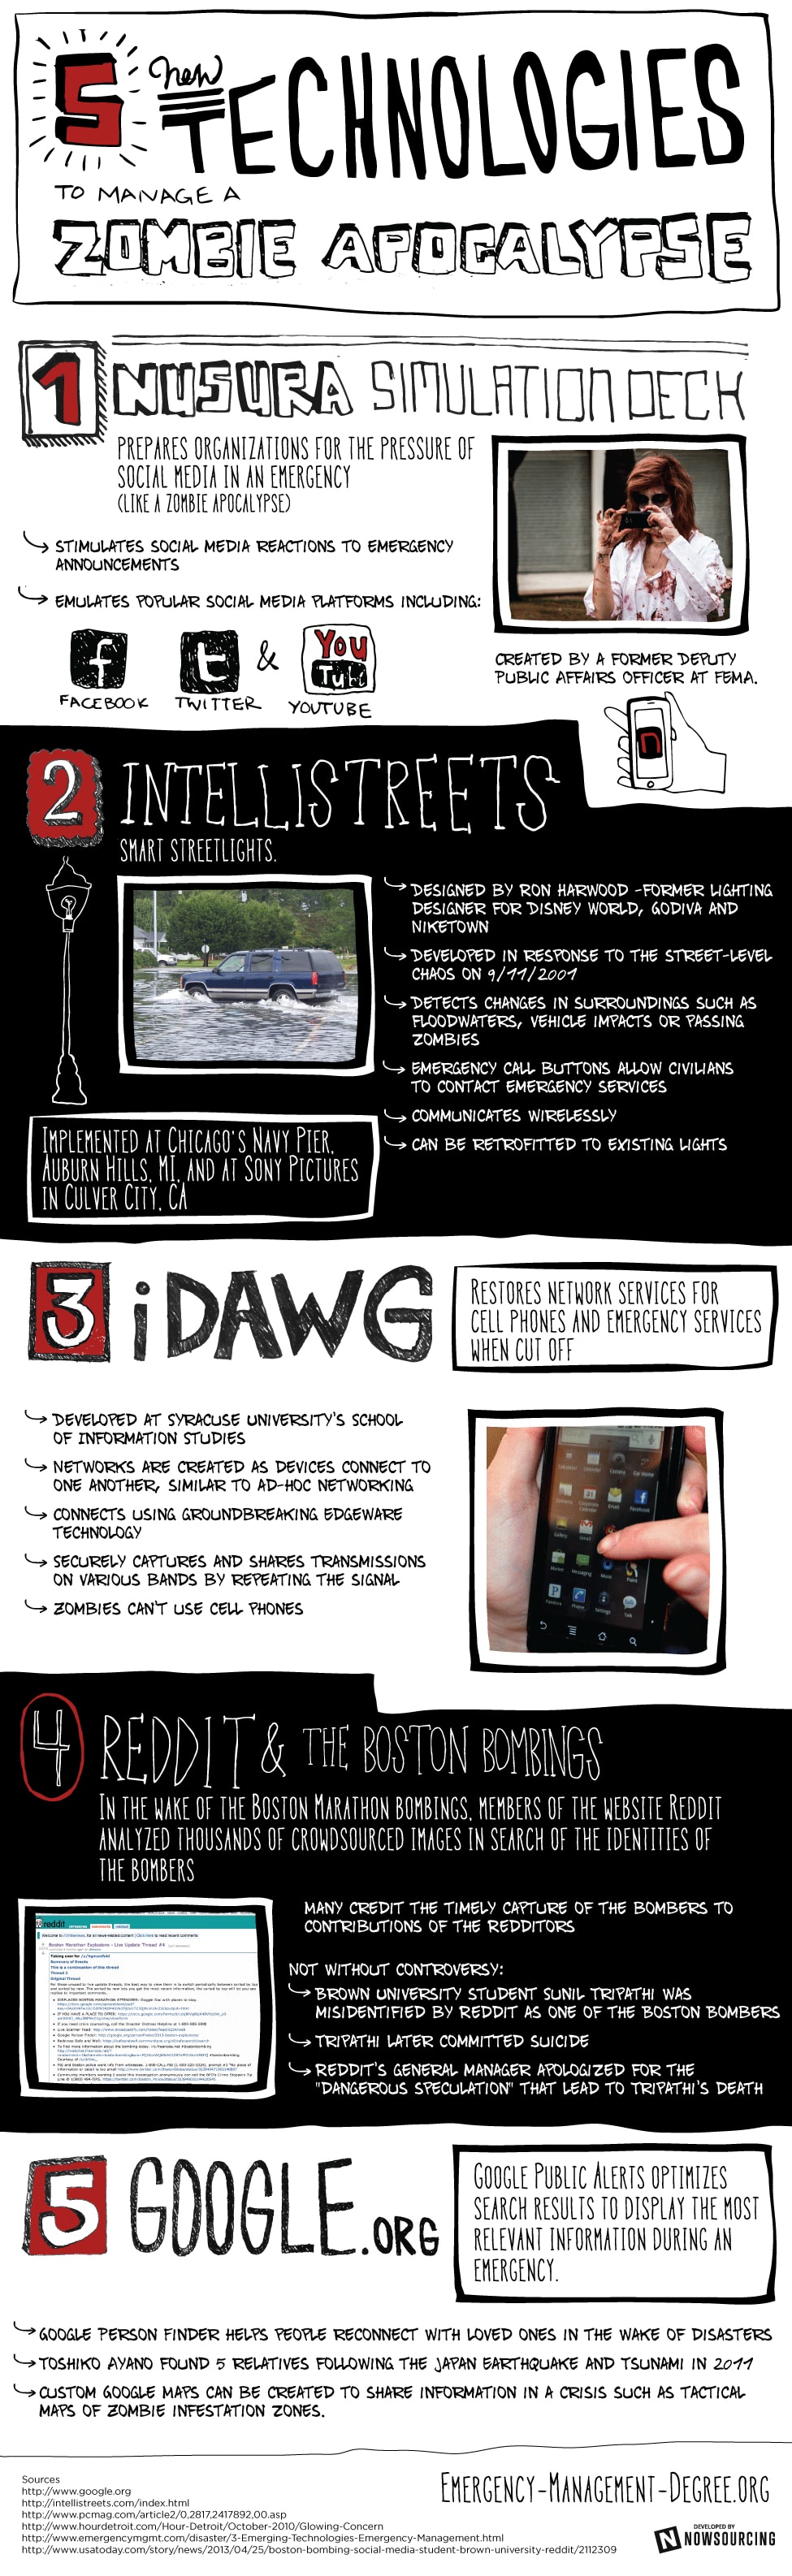 5 New Technologies To Help During A Zombie Apocalypse [Infographic]